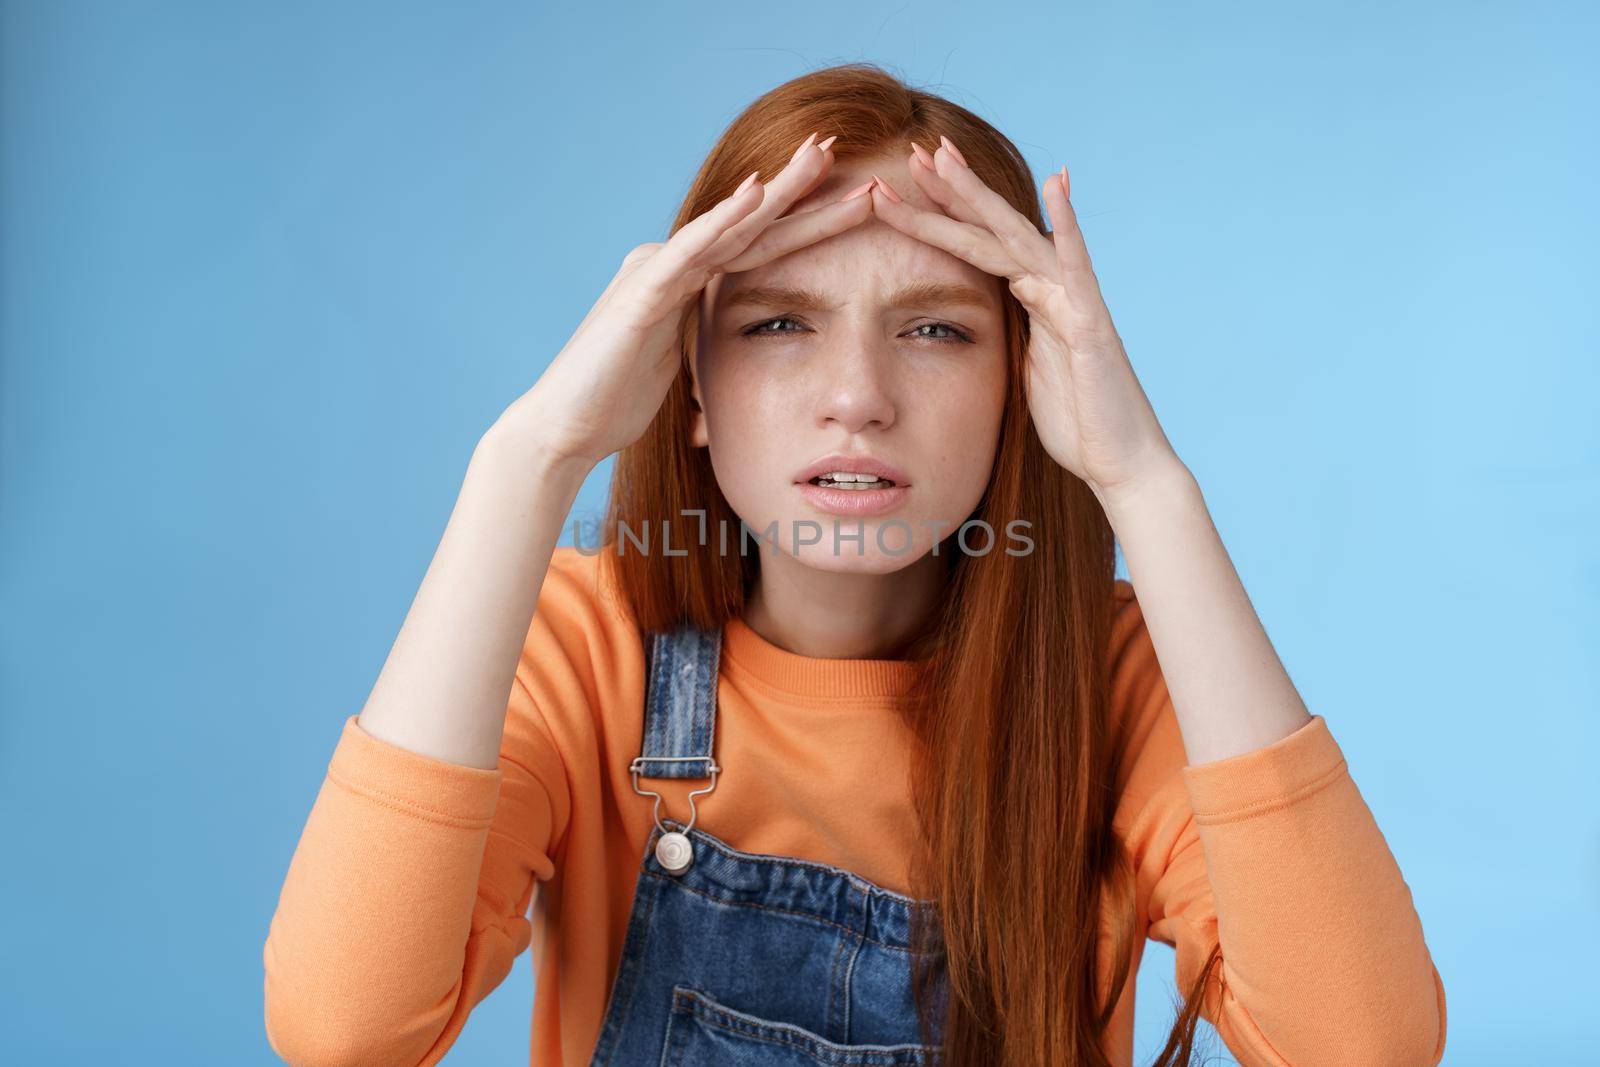 Puzzled unsure cute funny redhead european woman searching someone squinting cannot see without glasses peer into distance hold hands forehead cover sight sunlight, standing blue background.